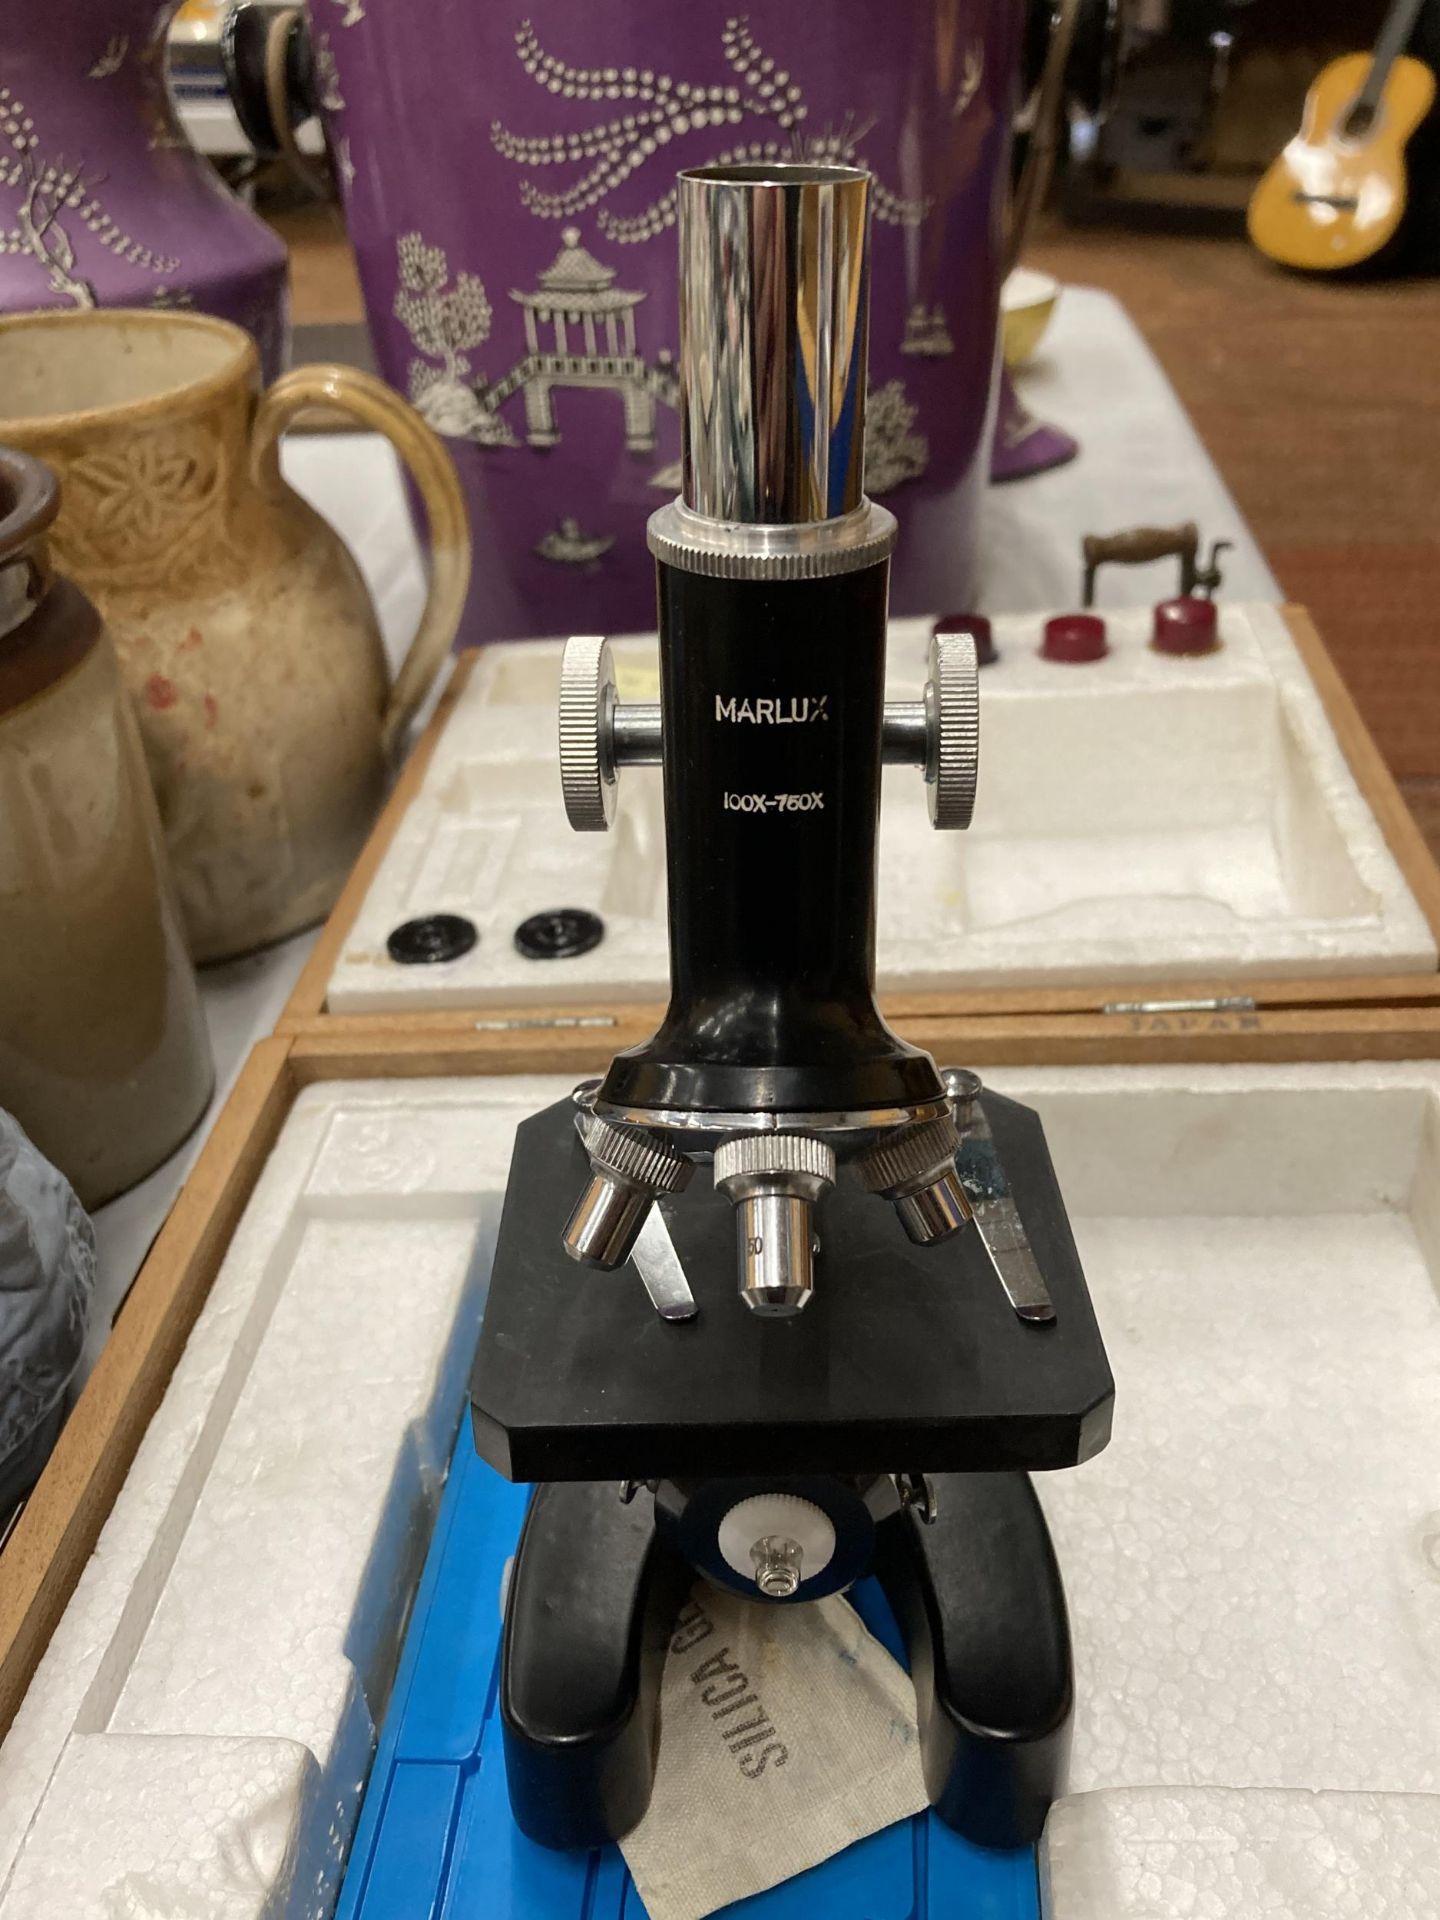 A VINTAGE BOXED MARLUX 100X-760X MICROSCOPE - Image 3 of 3